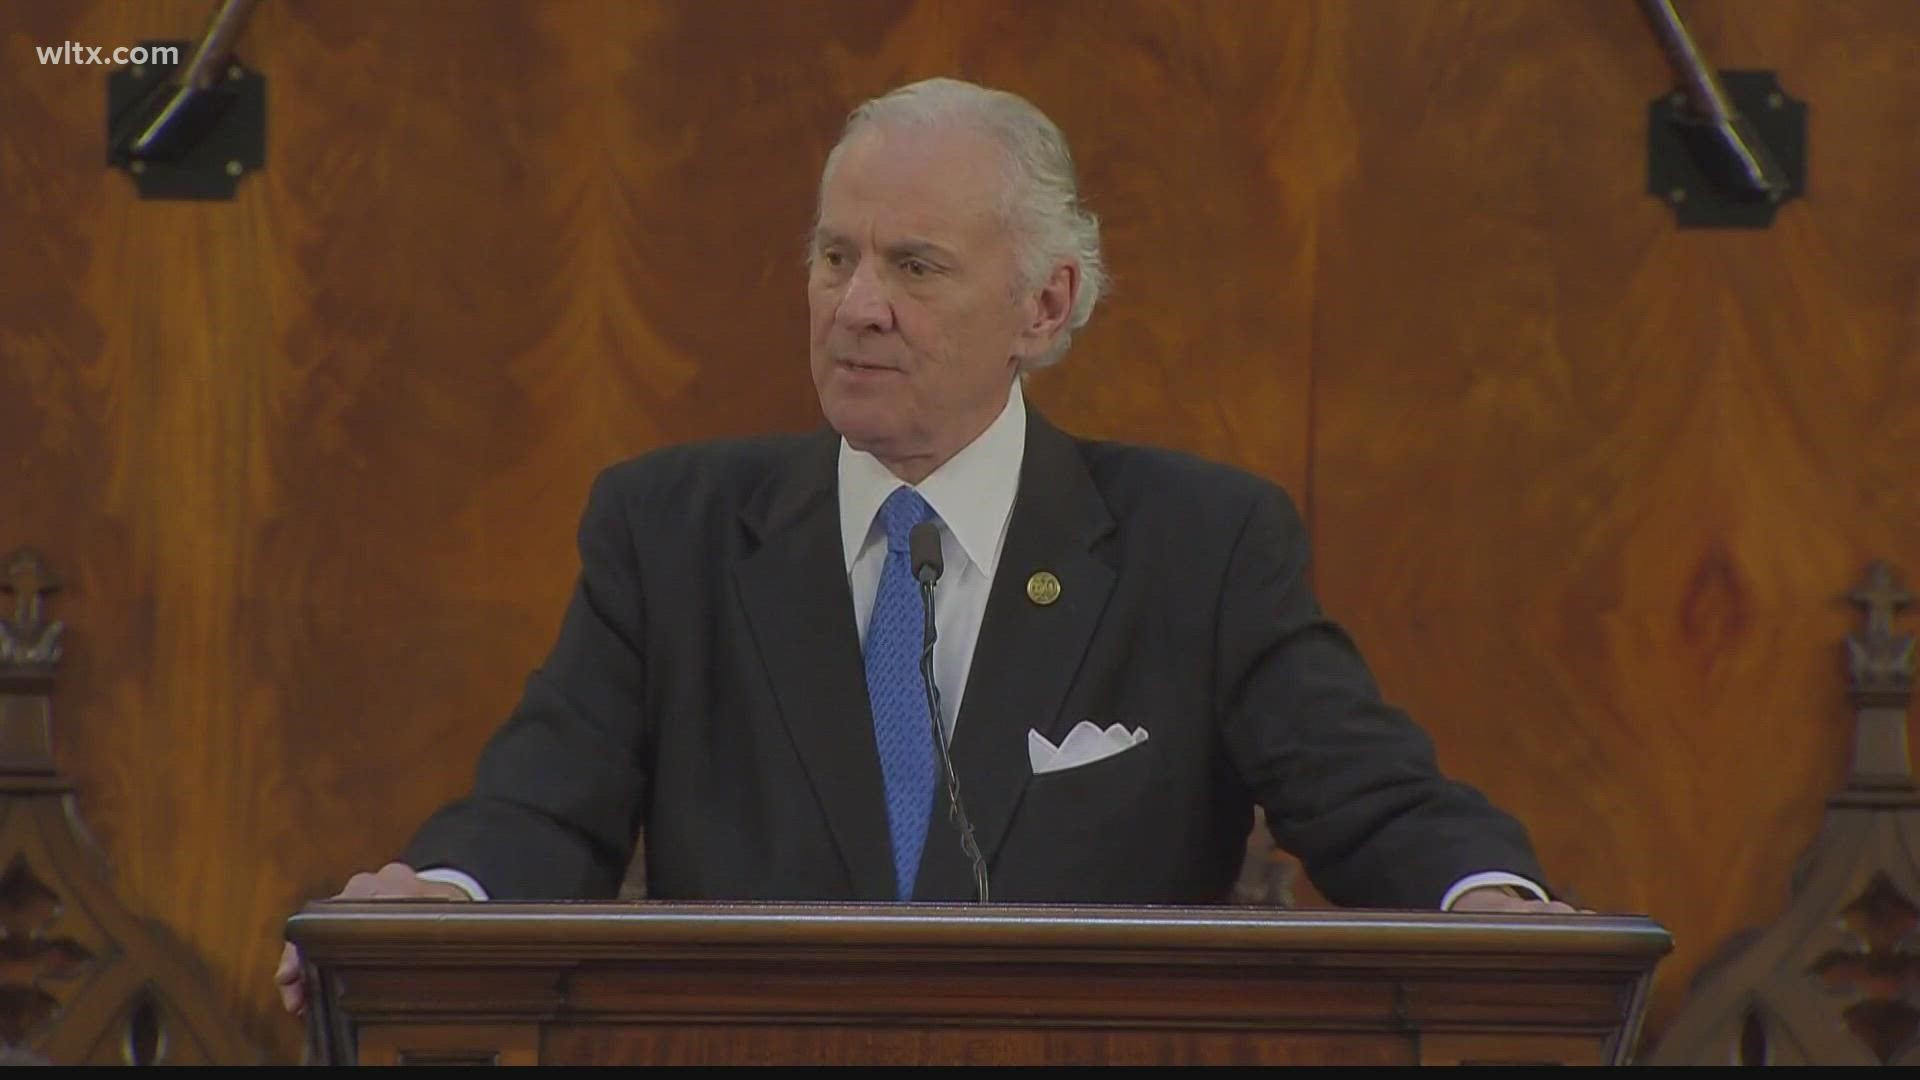 Governor Henry McMaster said South Carolina needs to be bold and seize opportunities created by billions of additional dollars in the budget.